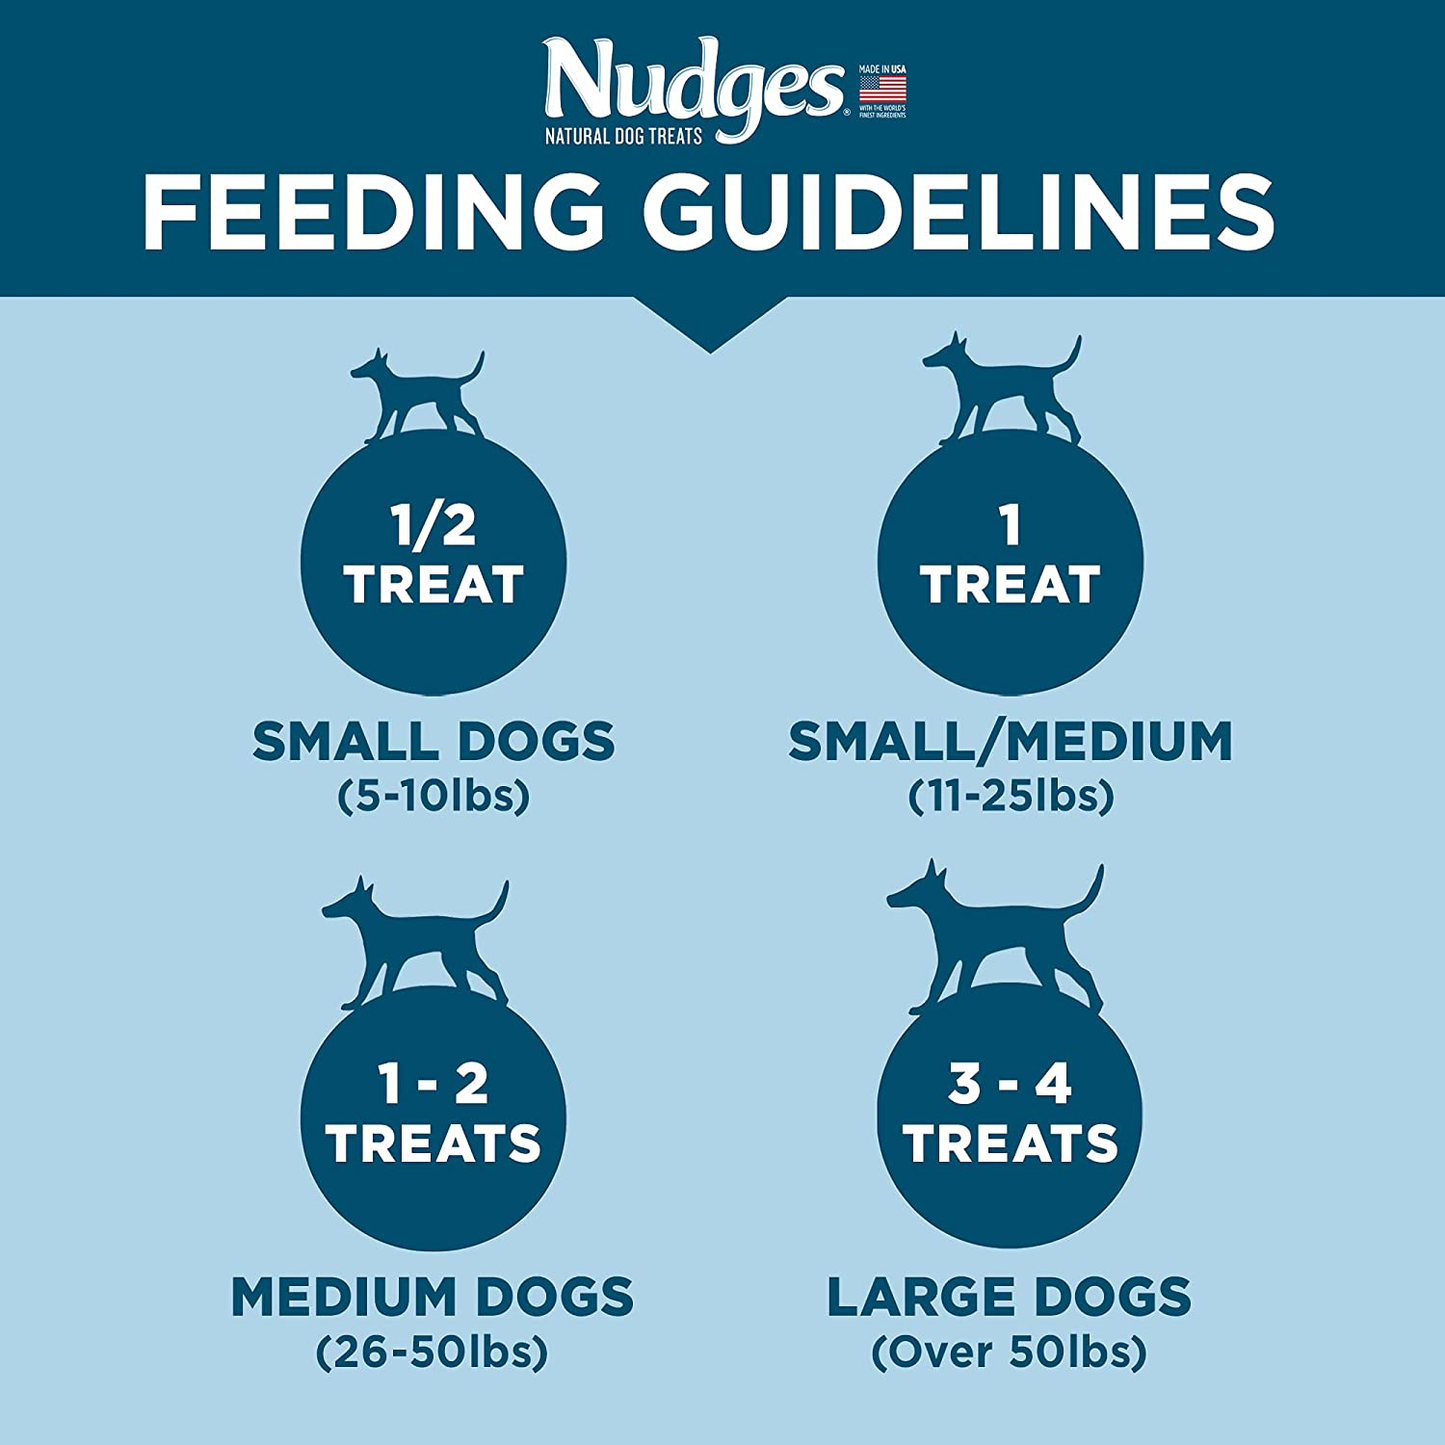 Nudges Natural Dog Treats Simply Sliced Made with Chicken Breast, 12 Oz Animals & Pet Supplies > Pet Supplies > Dog Supplies > Dog Treats Tyson   